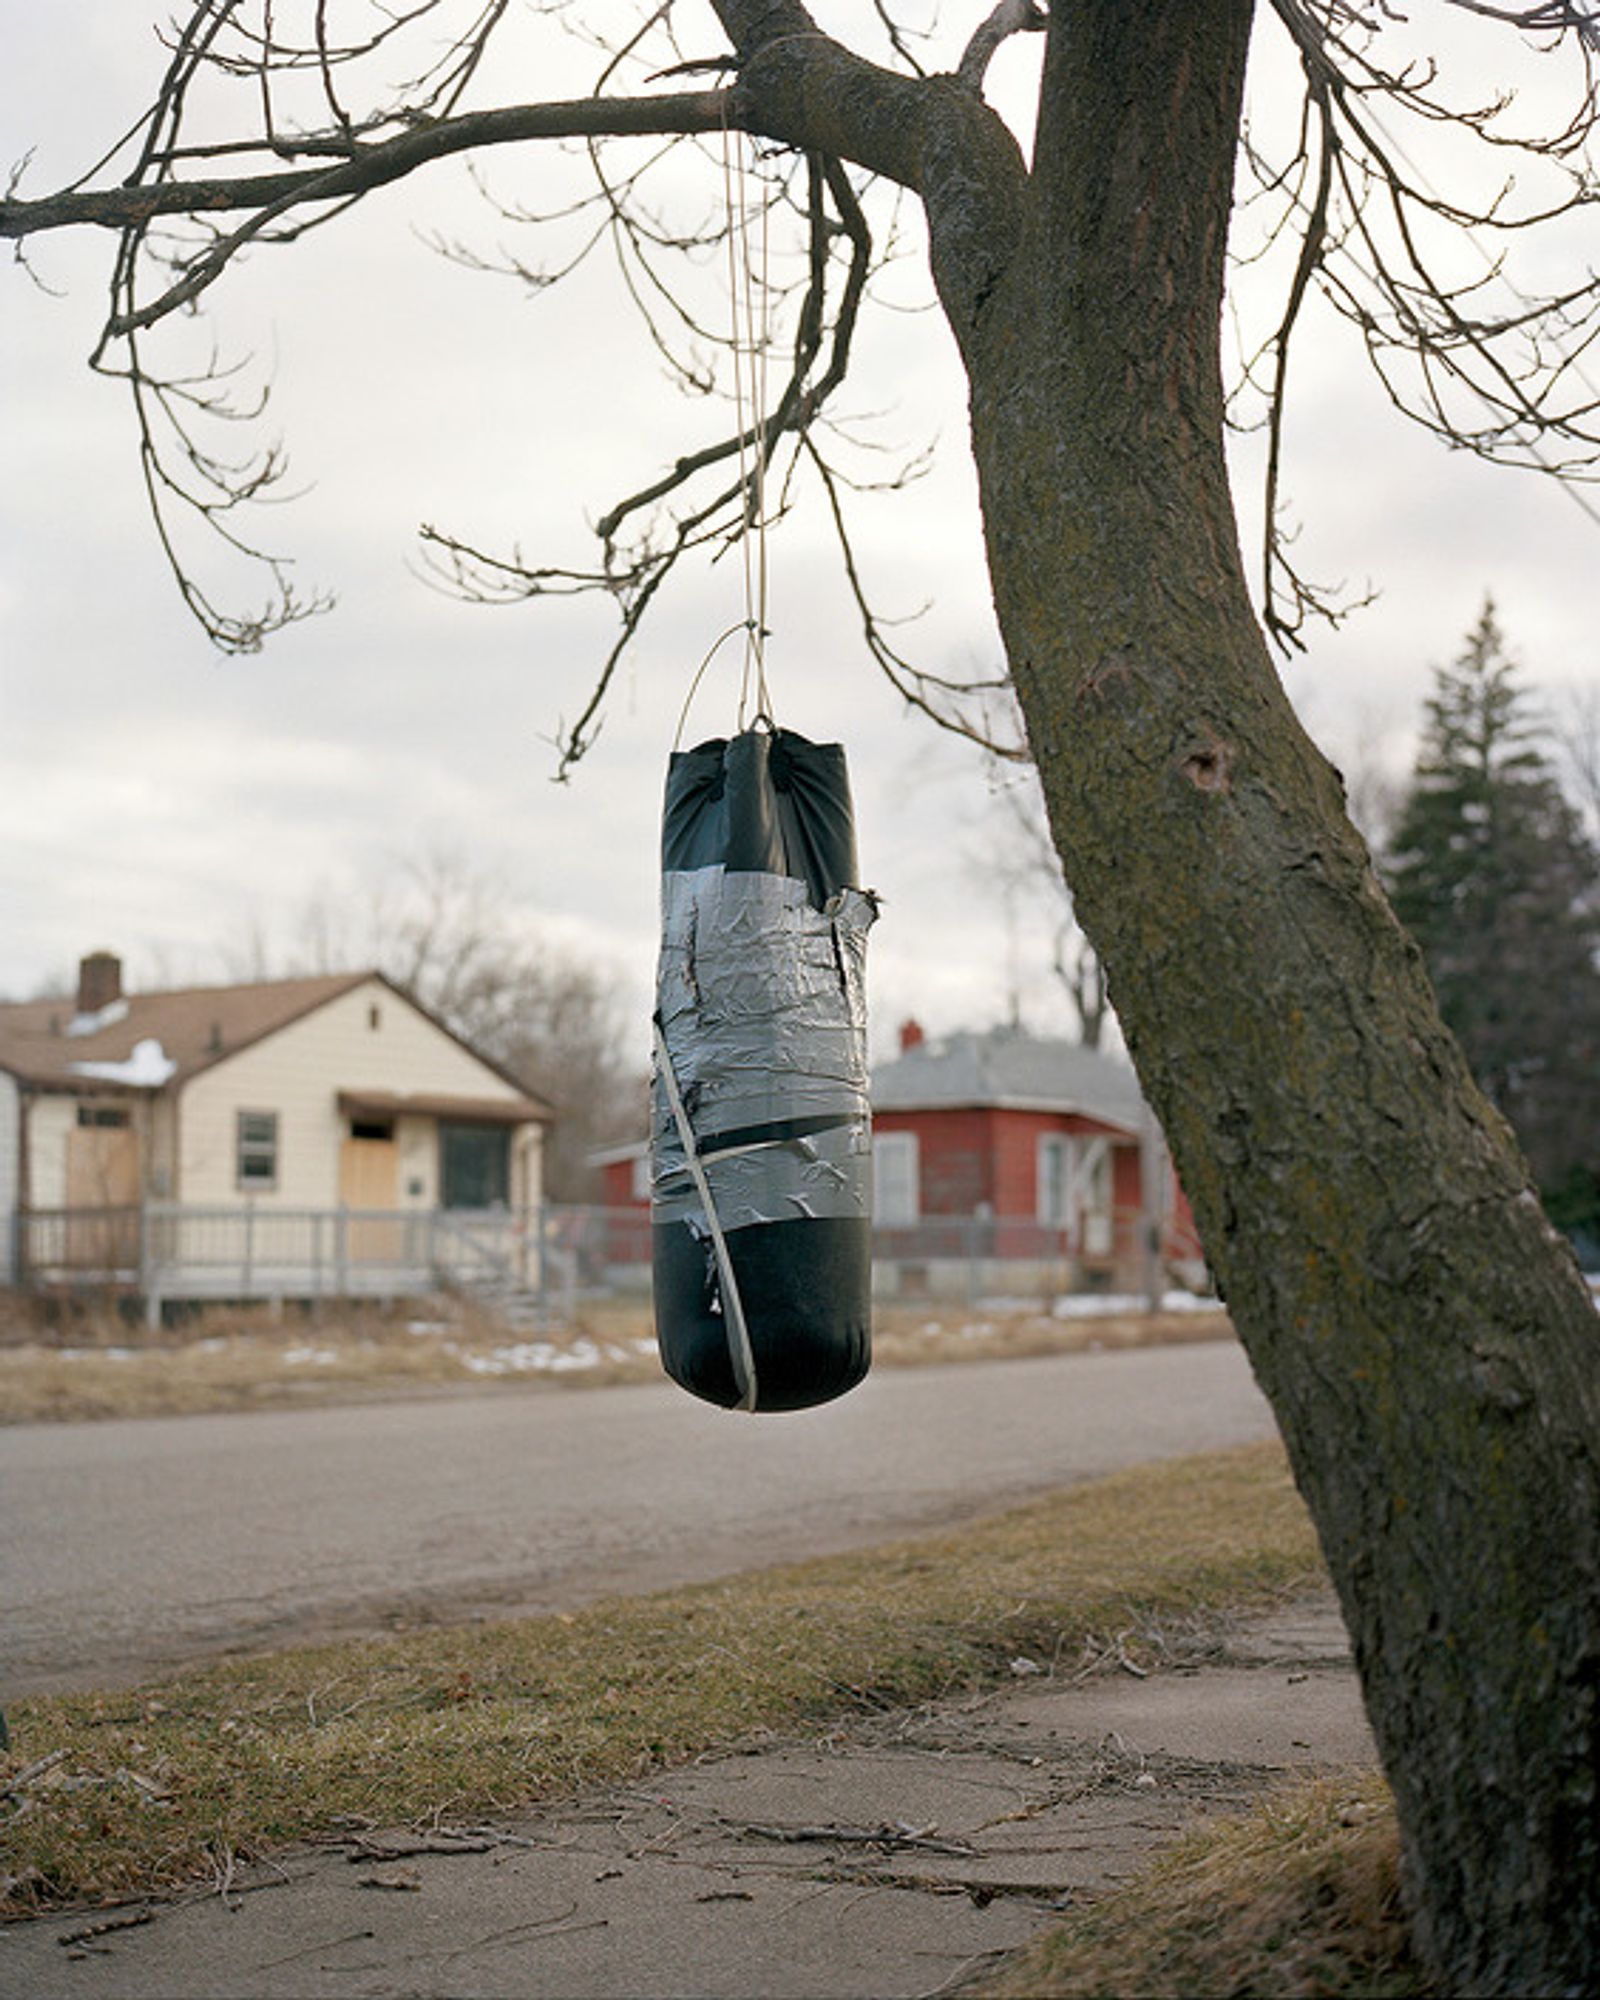 © Juan Madrid - A punching bag on the East Side. The owner was incarcerated for domestic abuse at the time of the photograph.